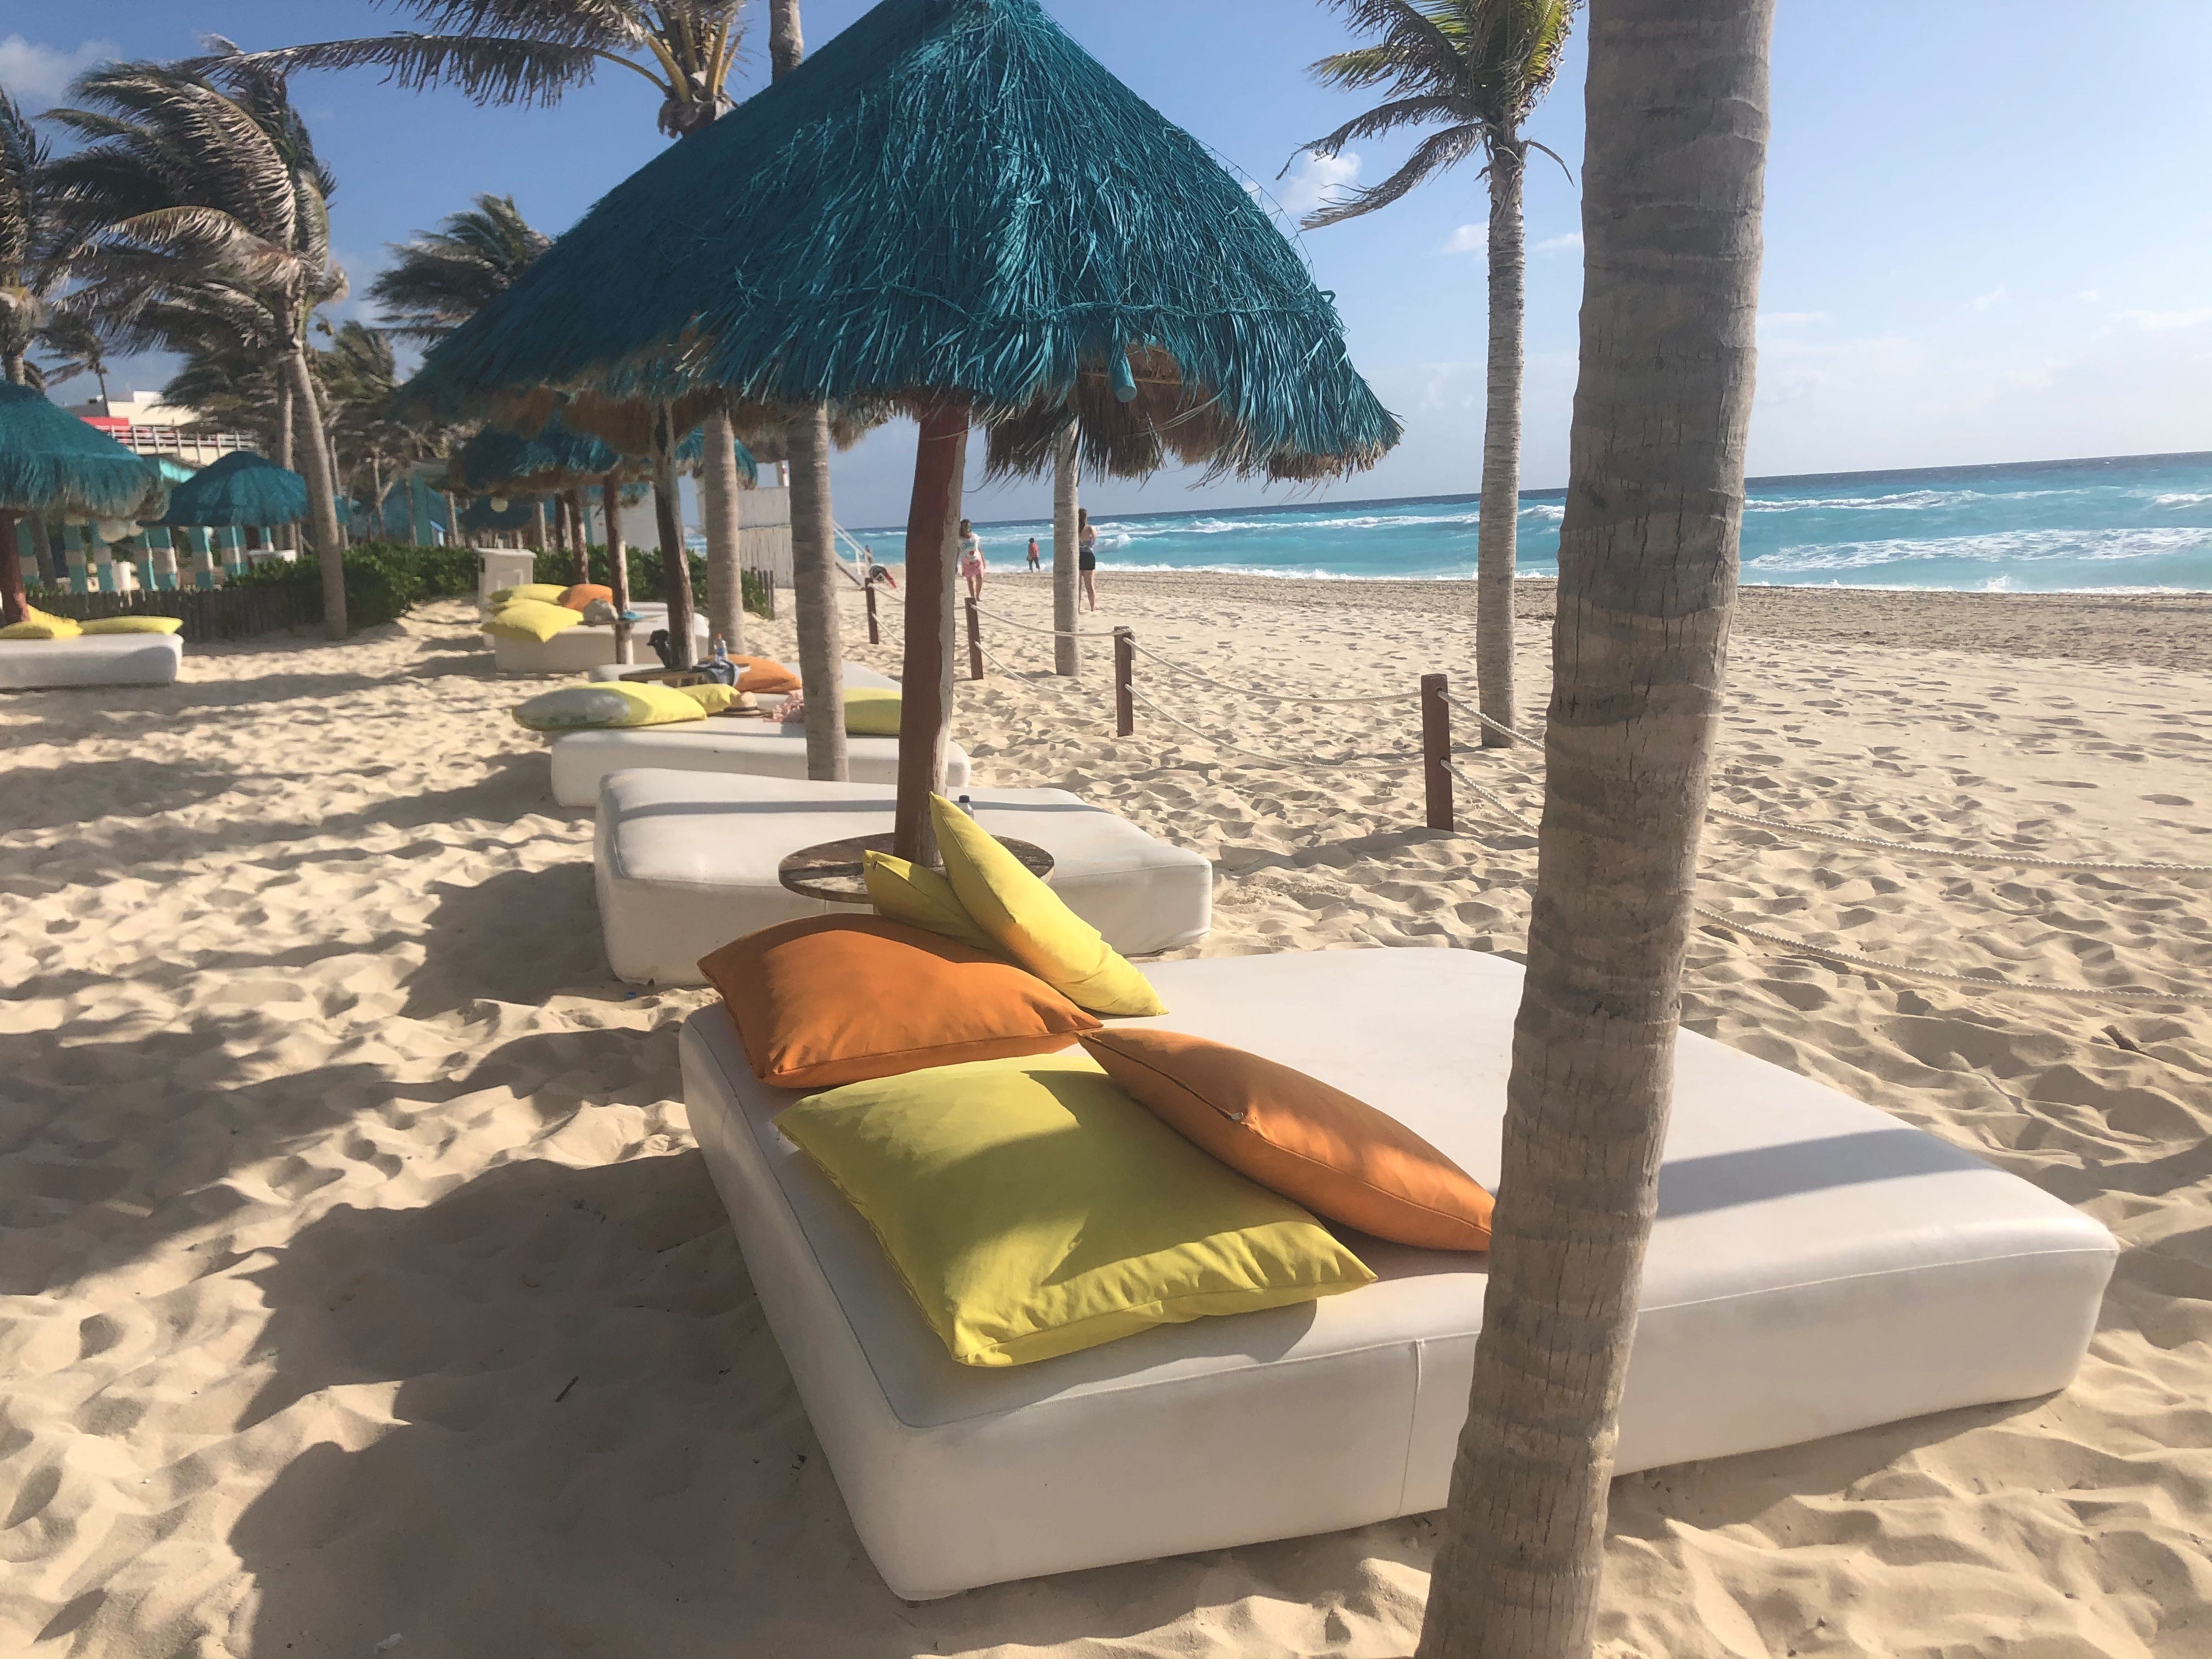 Beachfront day beds are available in Cancun, Mexico.